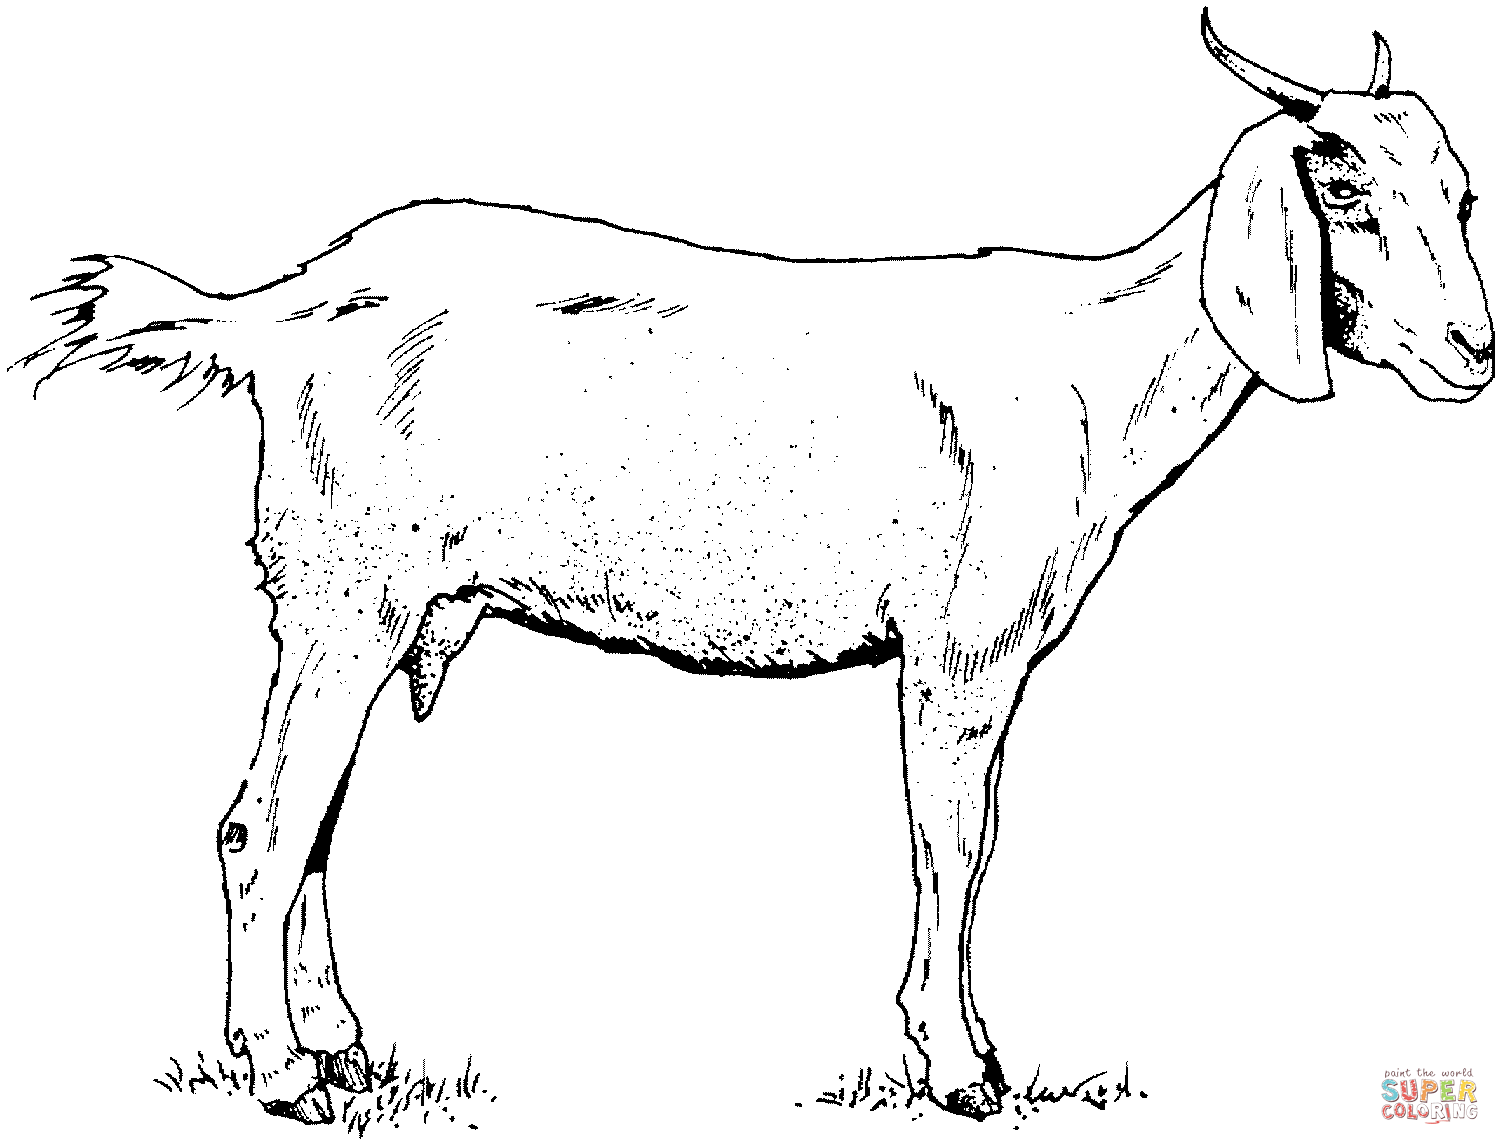 Domestic Goat coloring pages | Free Coloring Pages